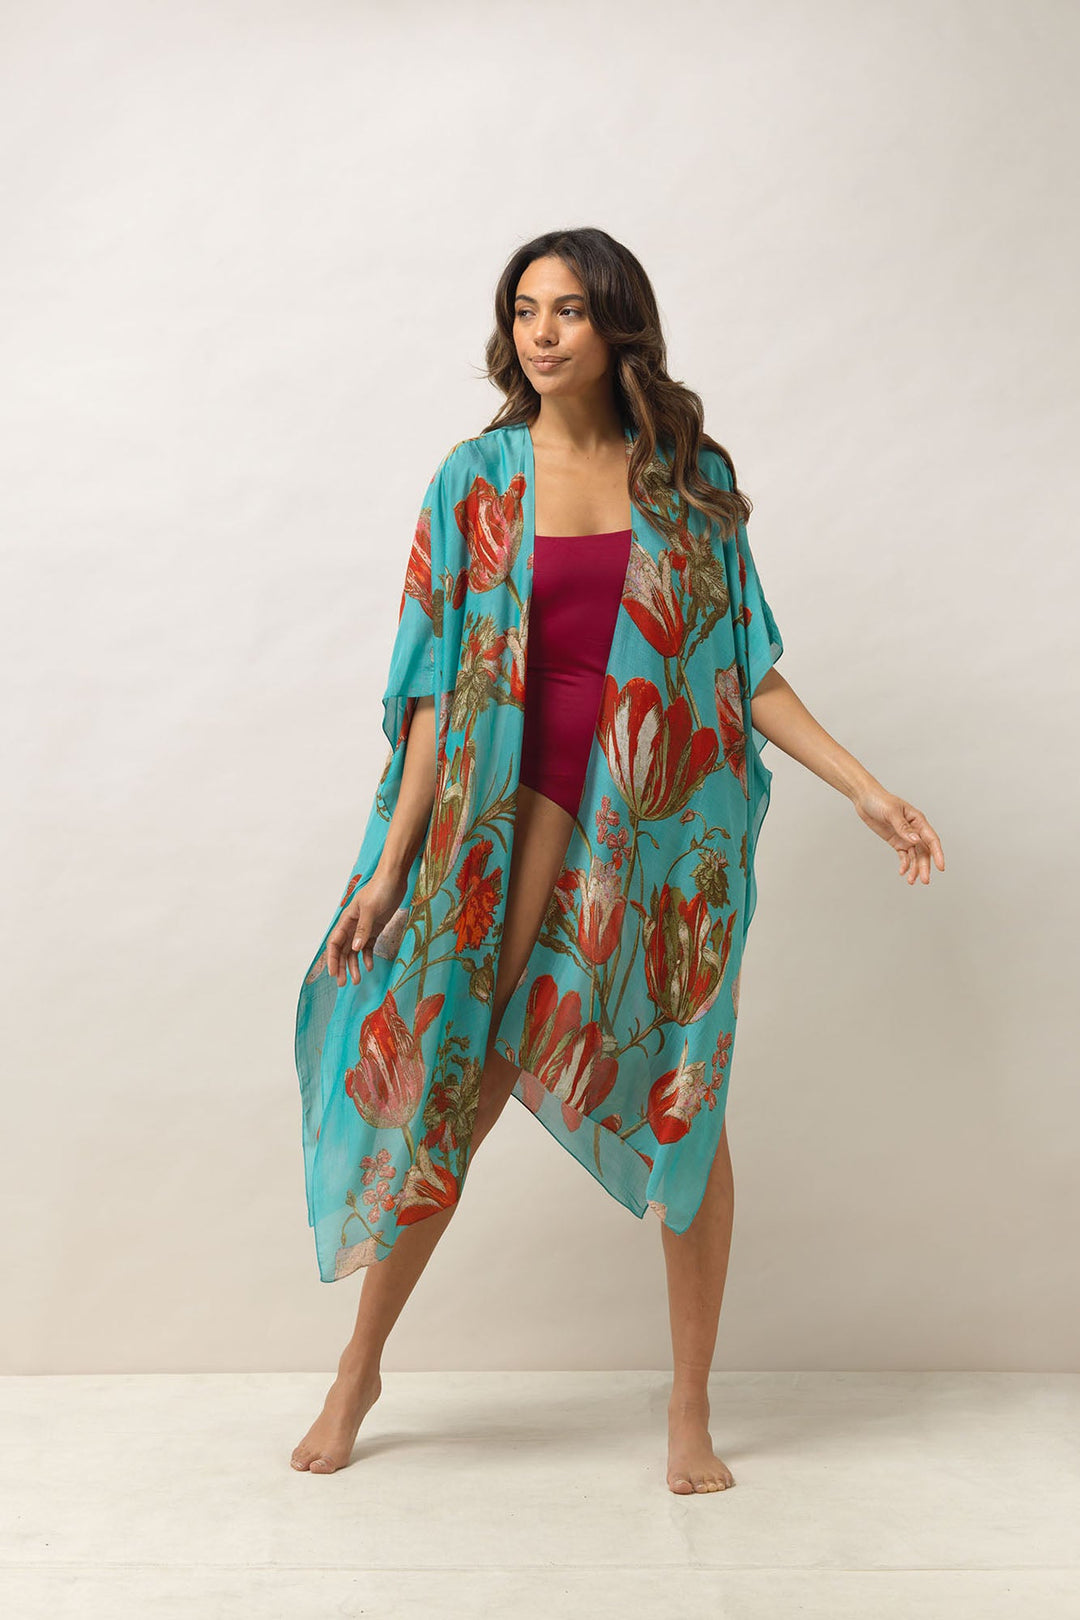 Women's lightweight throwover shawl in blue with tulip floral print by One Hundred Stars